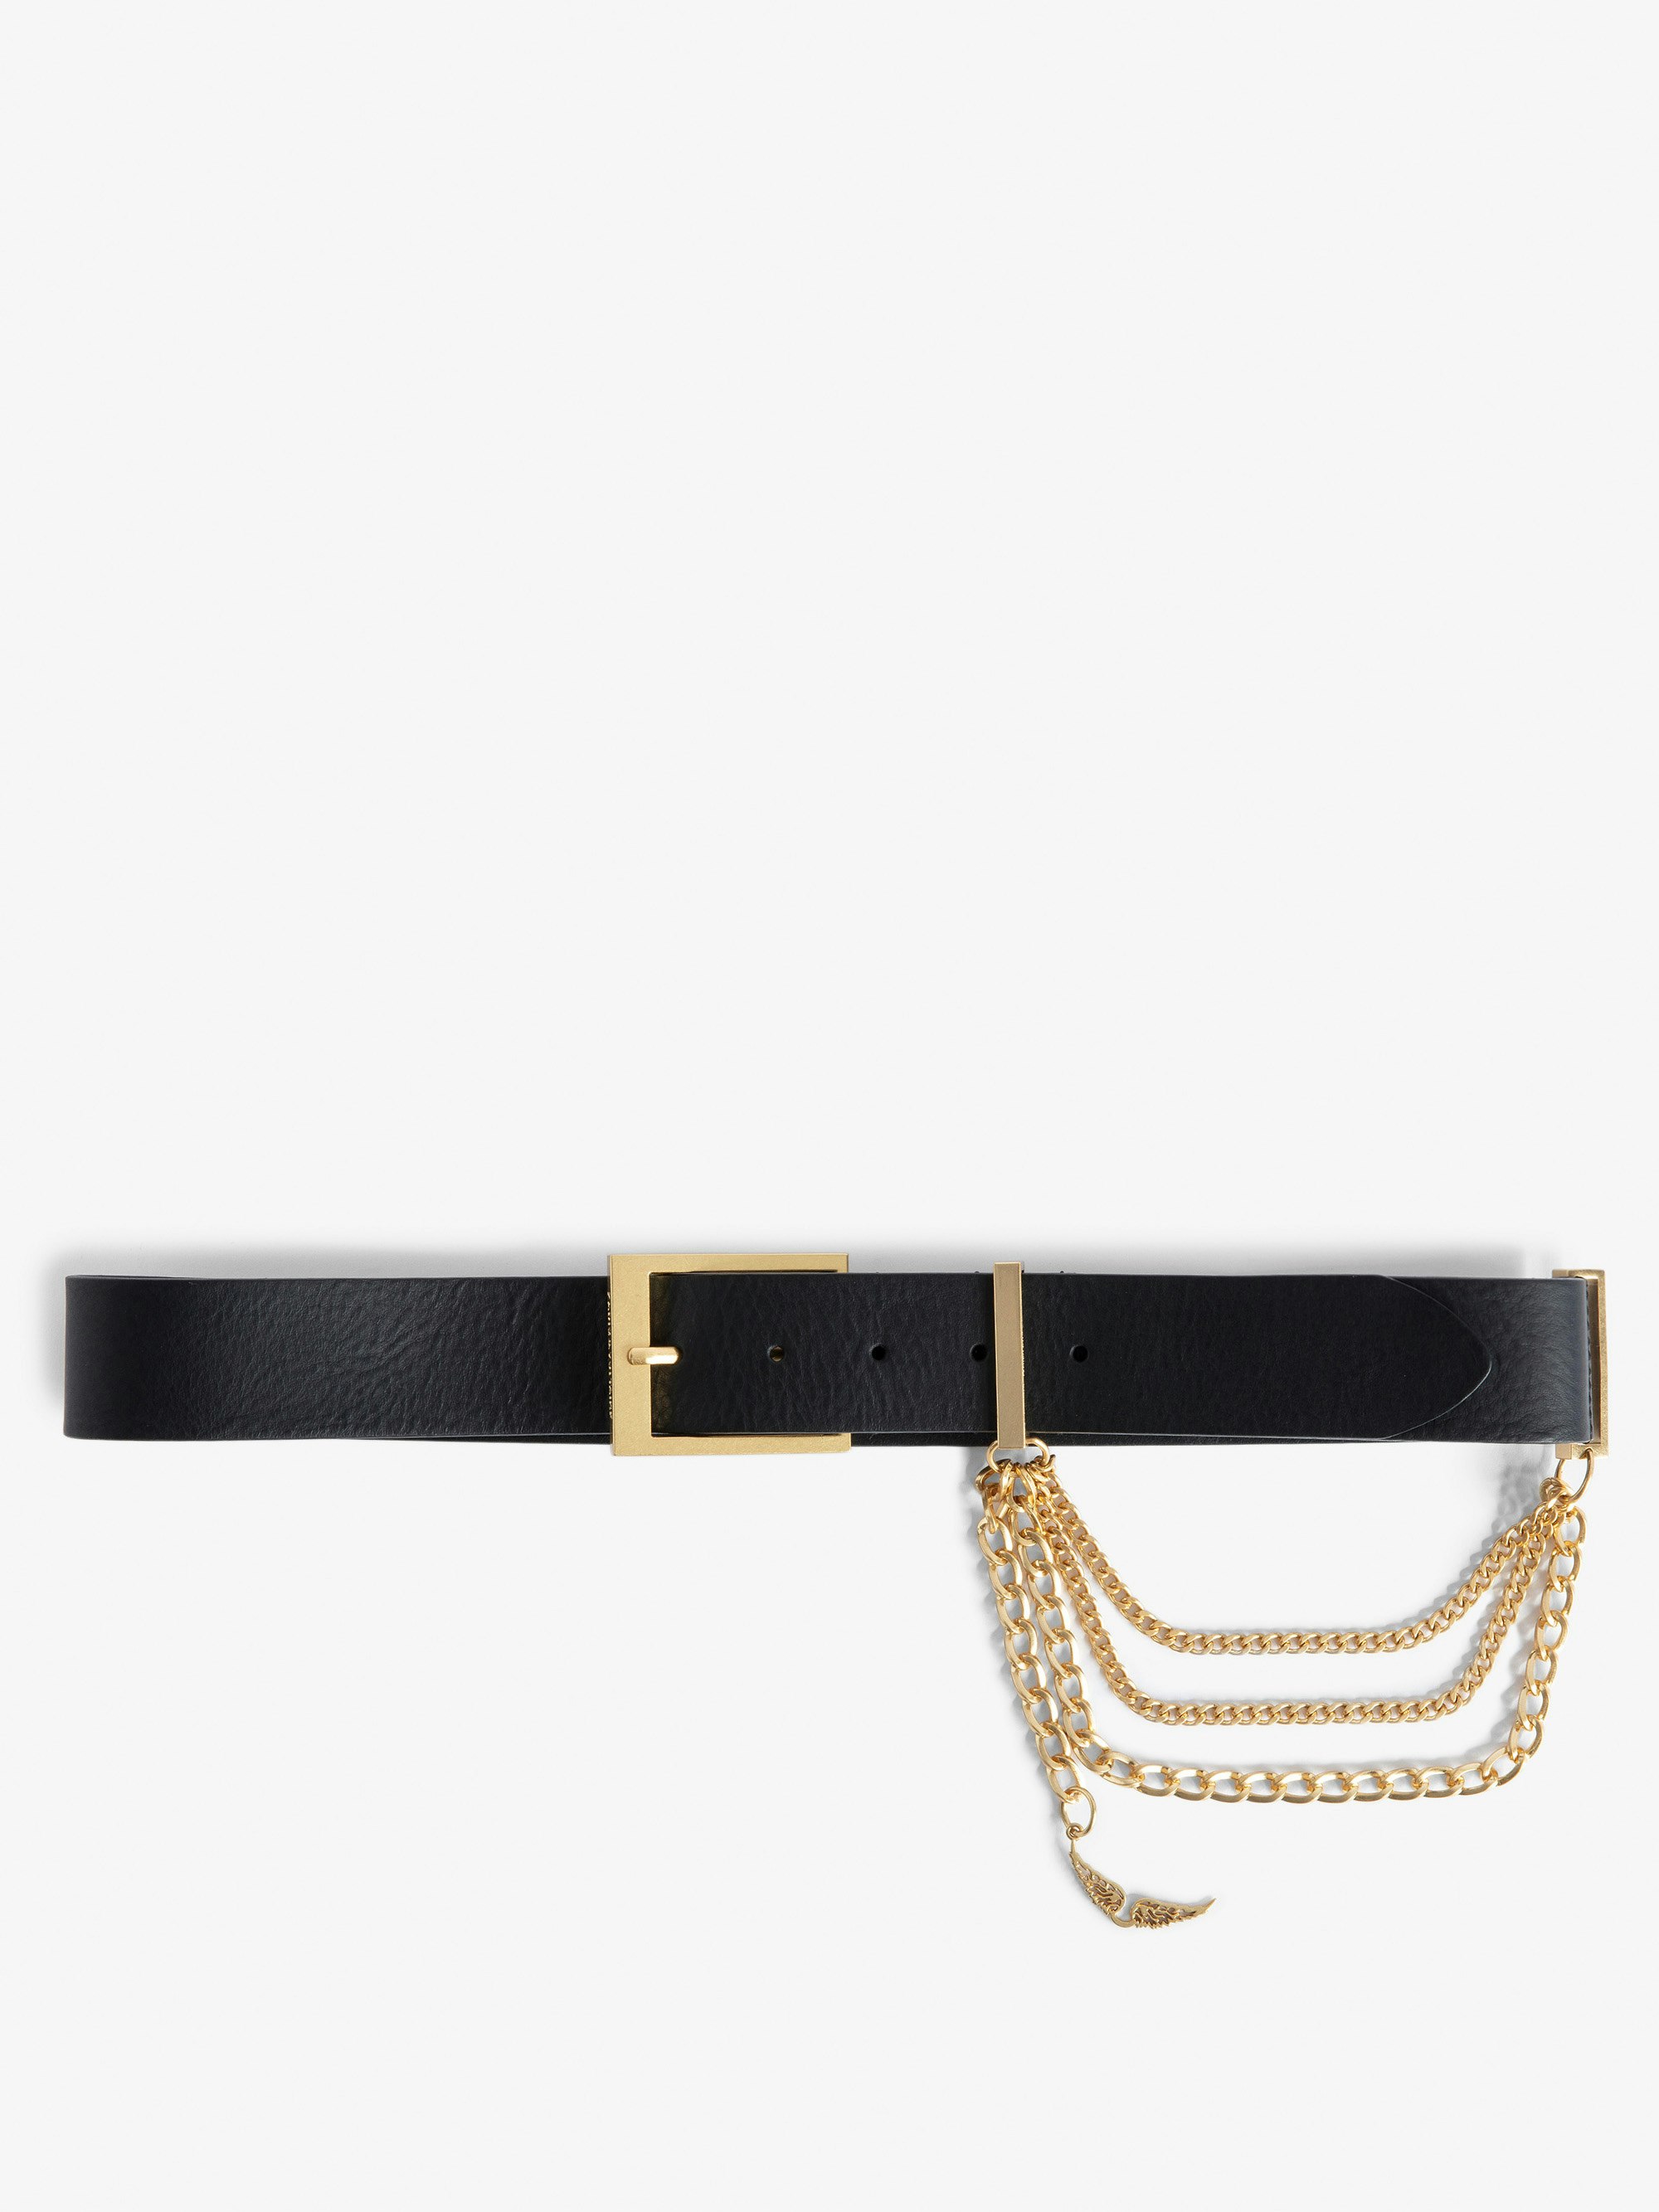 Rock Chain Belt - Women black leather belt with triple chain and wings charm.